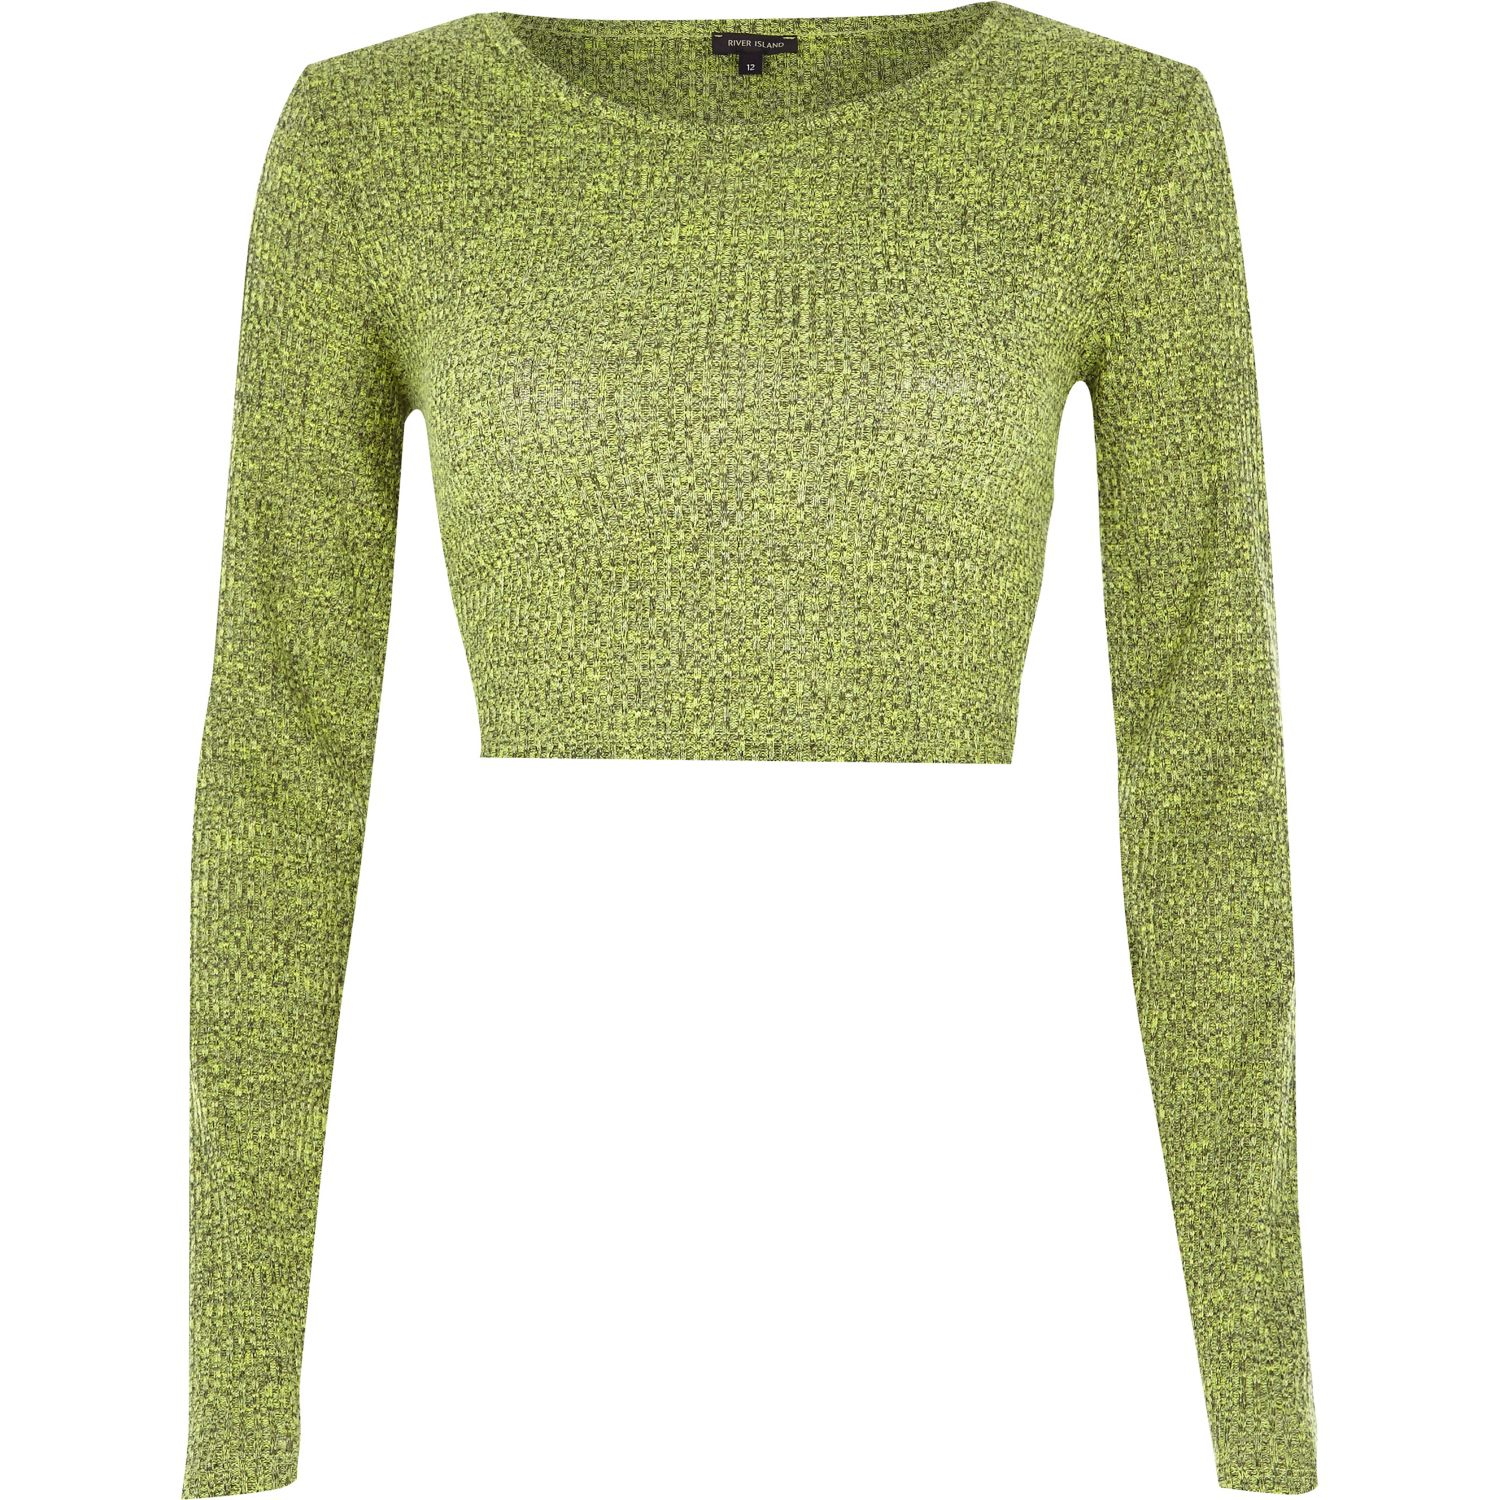 River Island Lime Marl Long Sleeve Crop Top in Green | Lyst